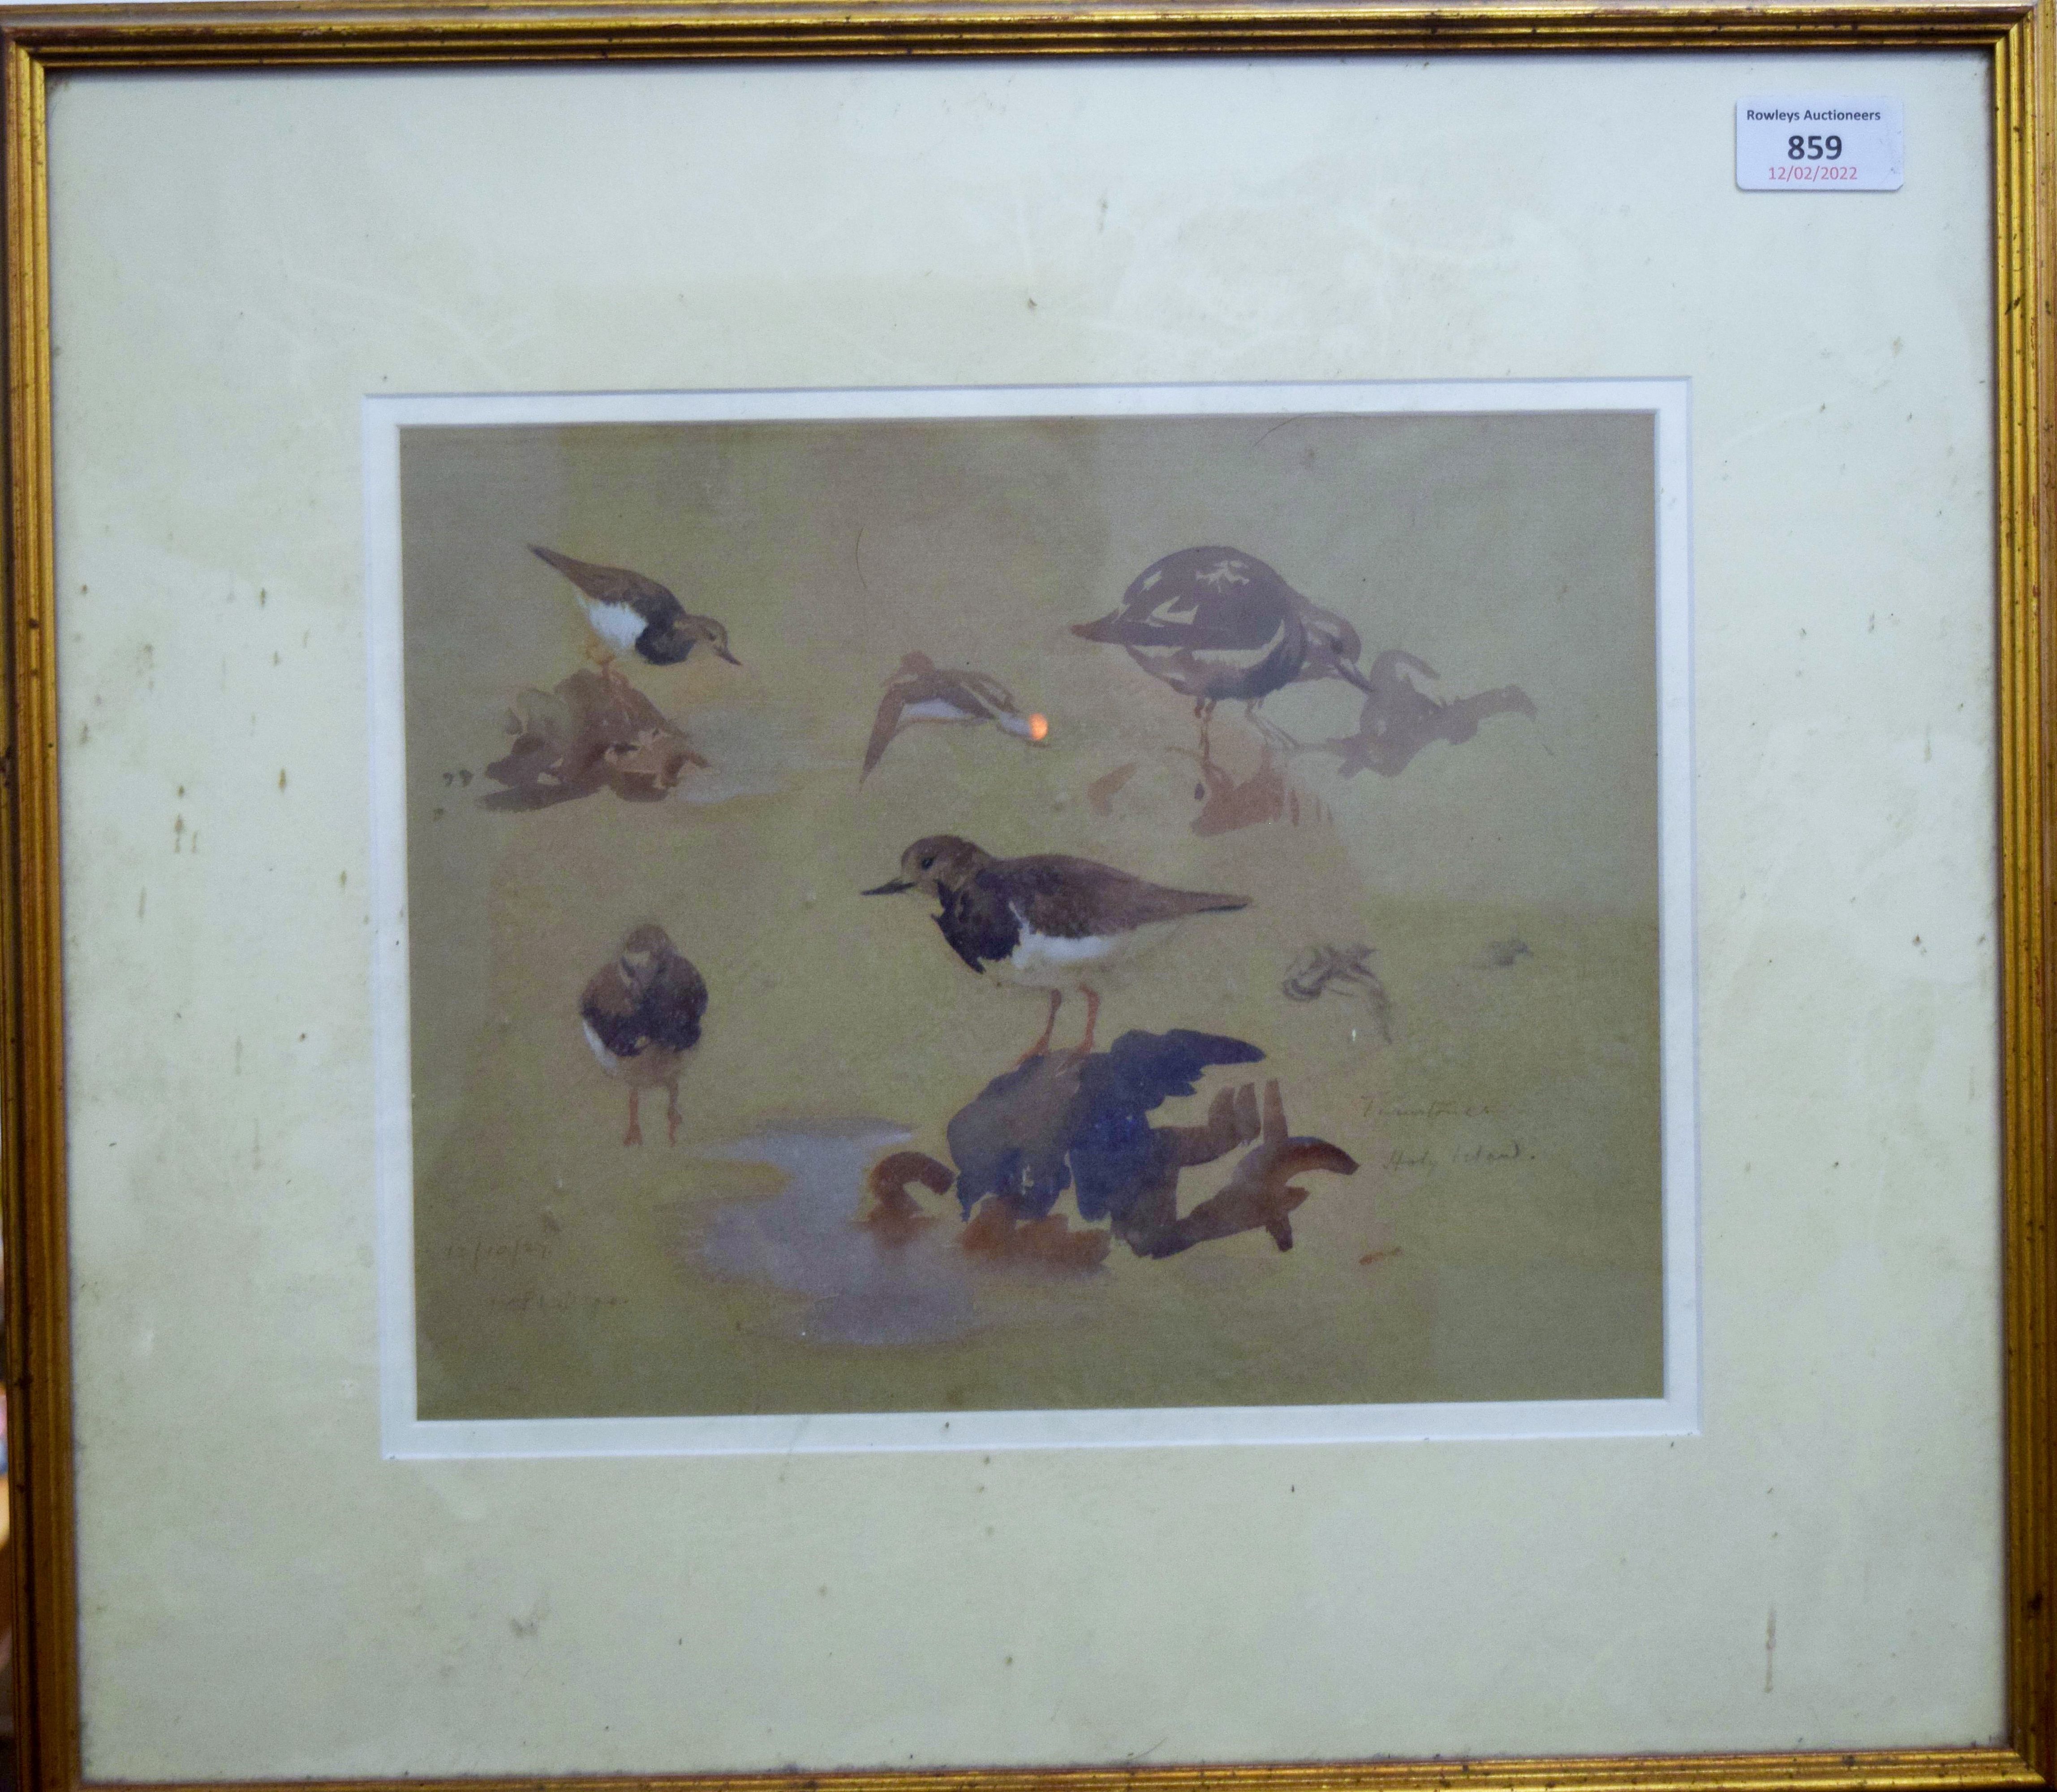 PATRICK PHILLIPS, Turnstones Holy Island 1927, watercolour, signed, dated and inscribed in pencil, - Image 6 of 6